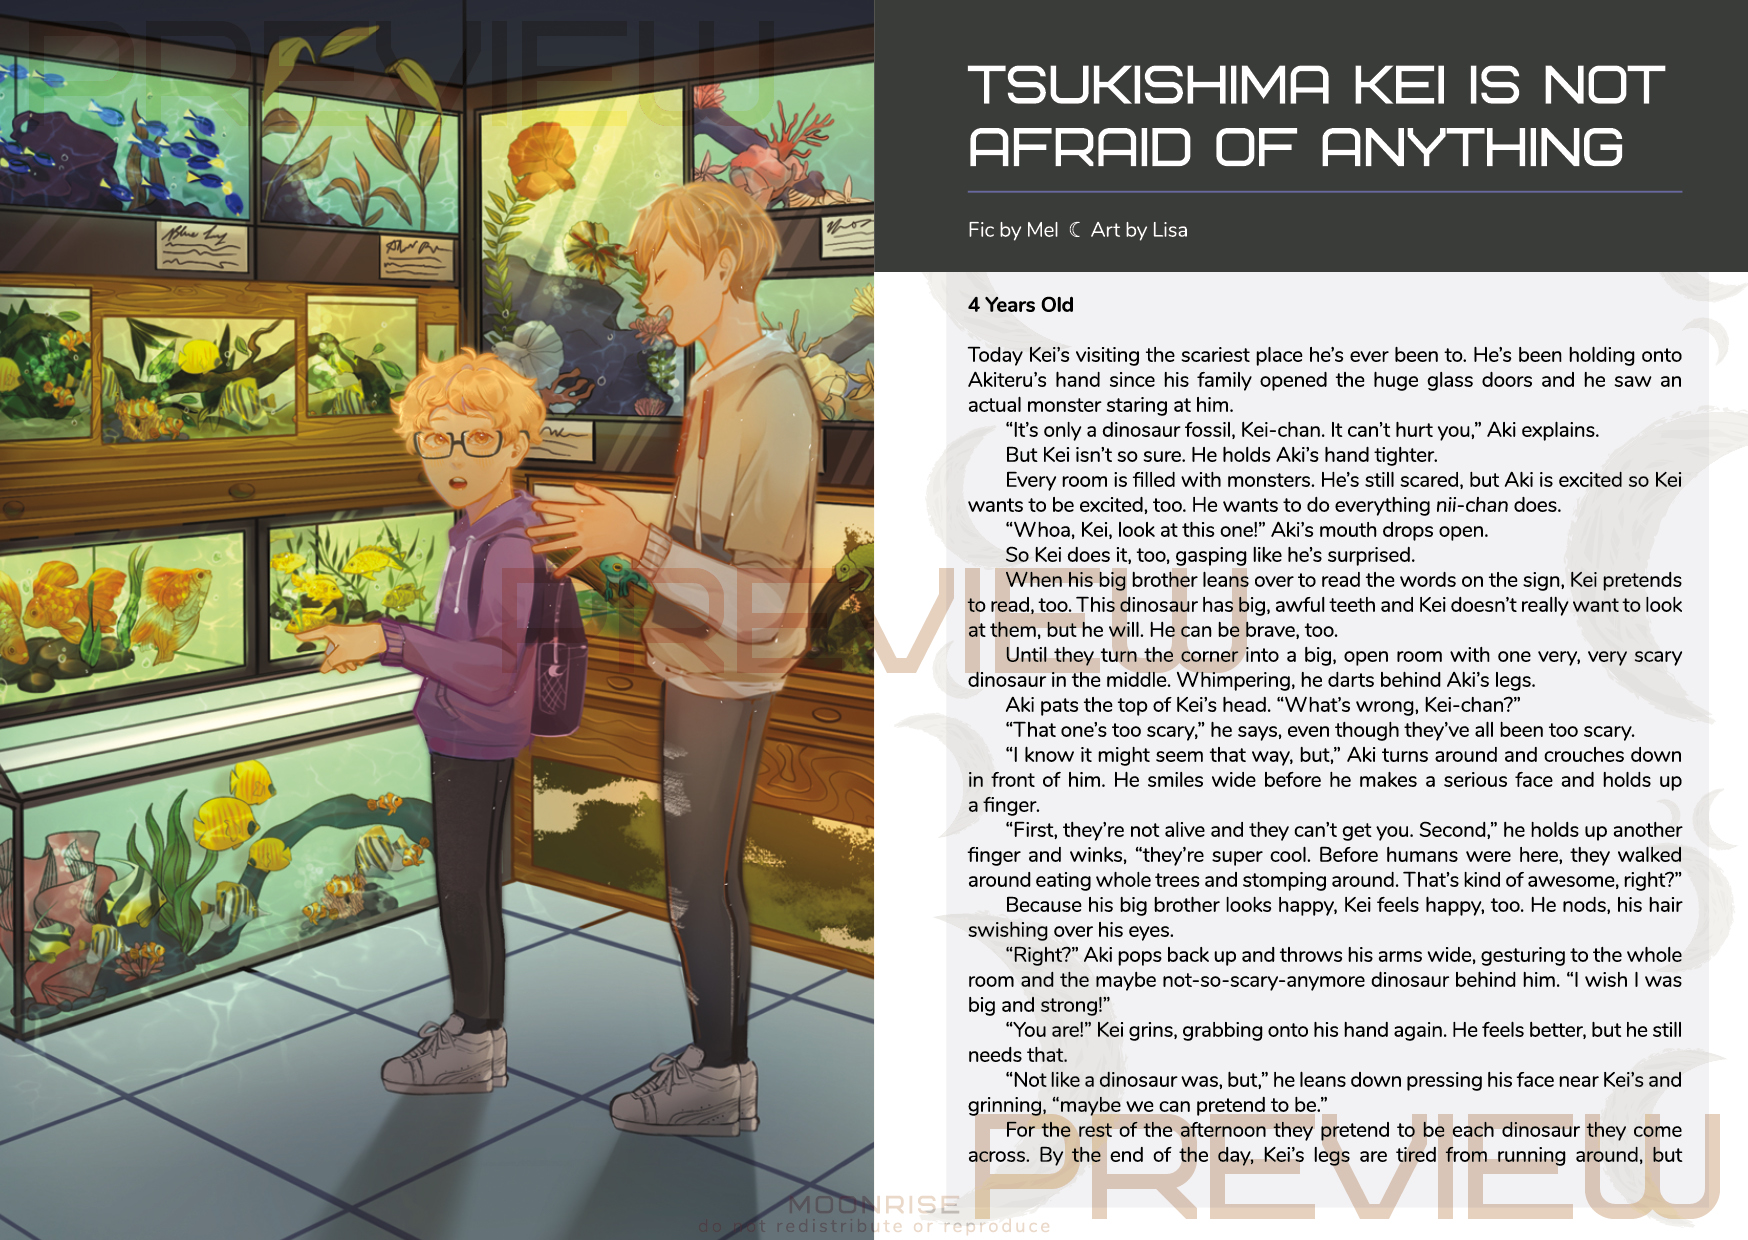 A screenshot of one of the digital zine's spreads--the left showing an illustration by Kou, and the right showing the first page of Mel's fanfic.